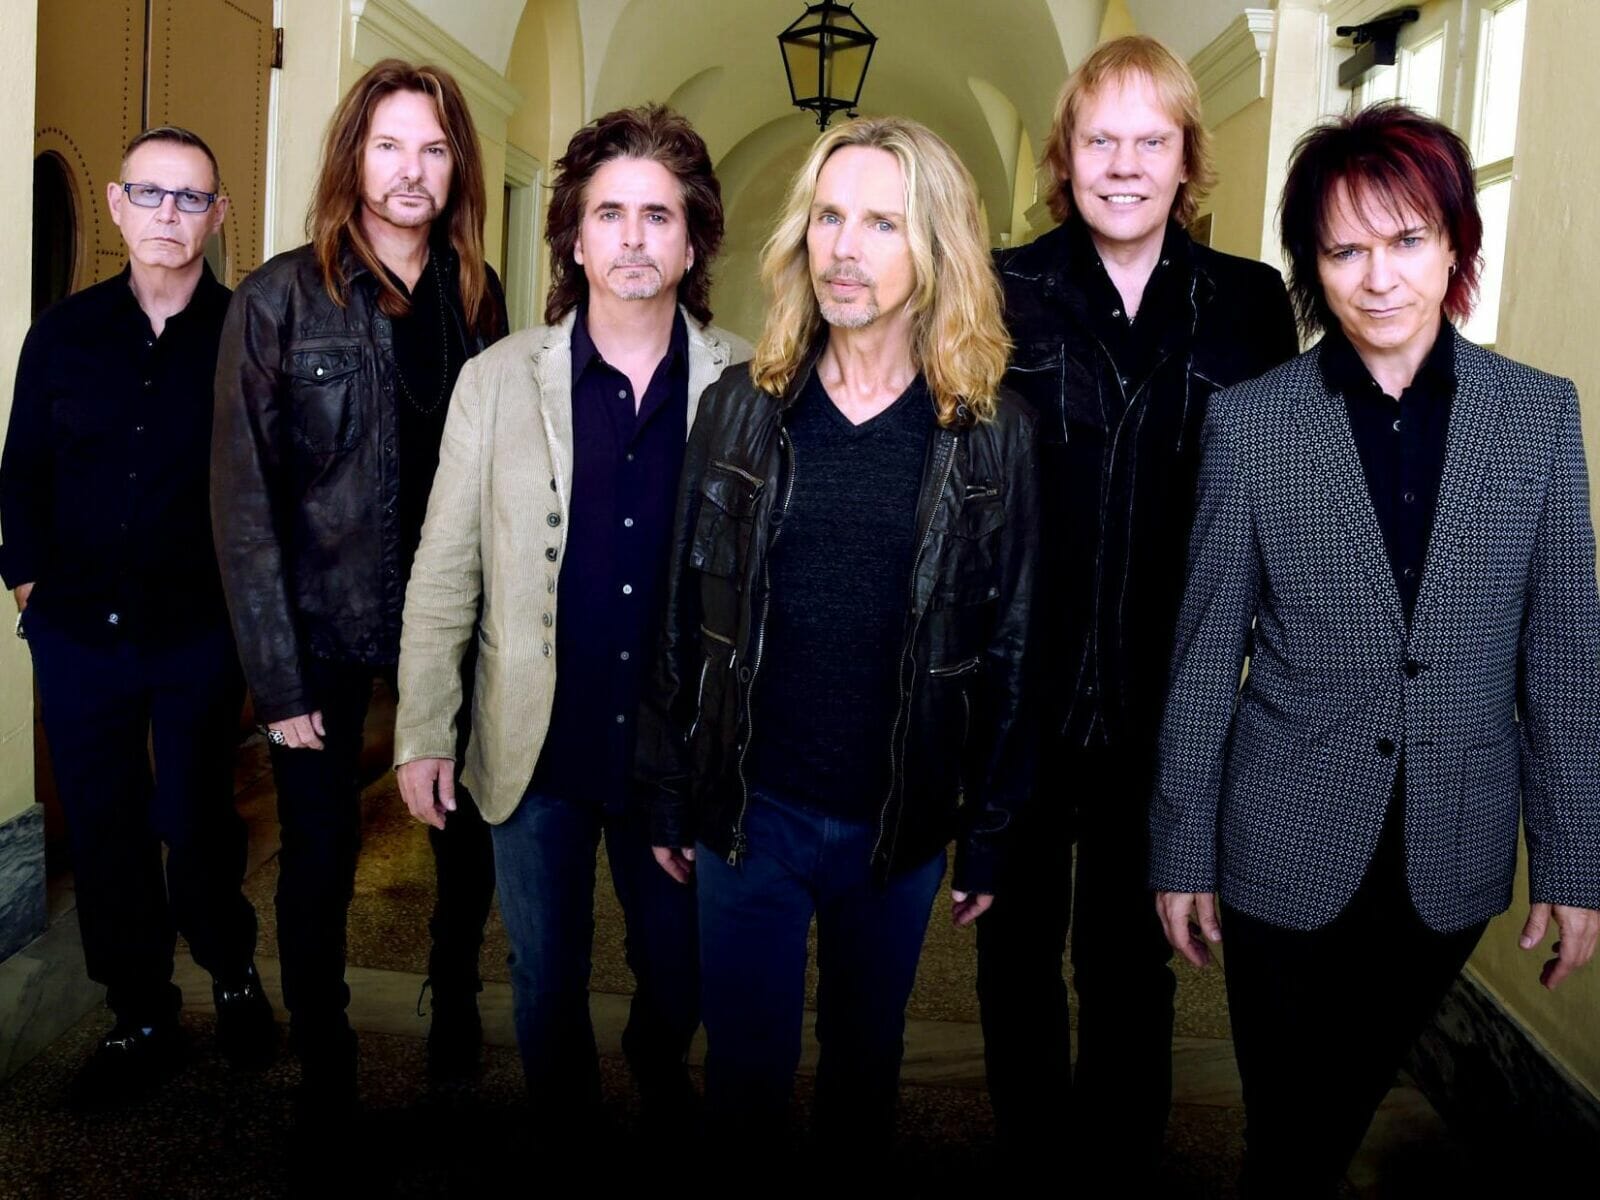 Styx returns to Celebrity Theatre in 2023 for 2 shows AZ Big Media